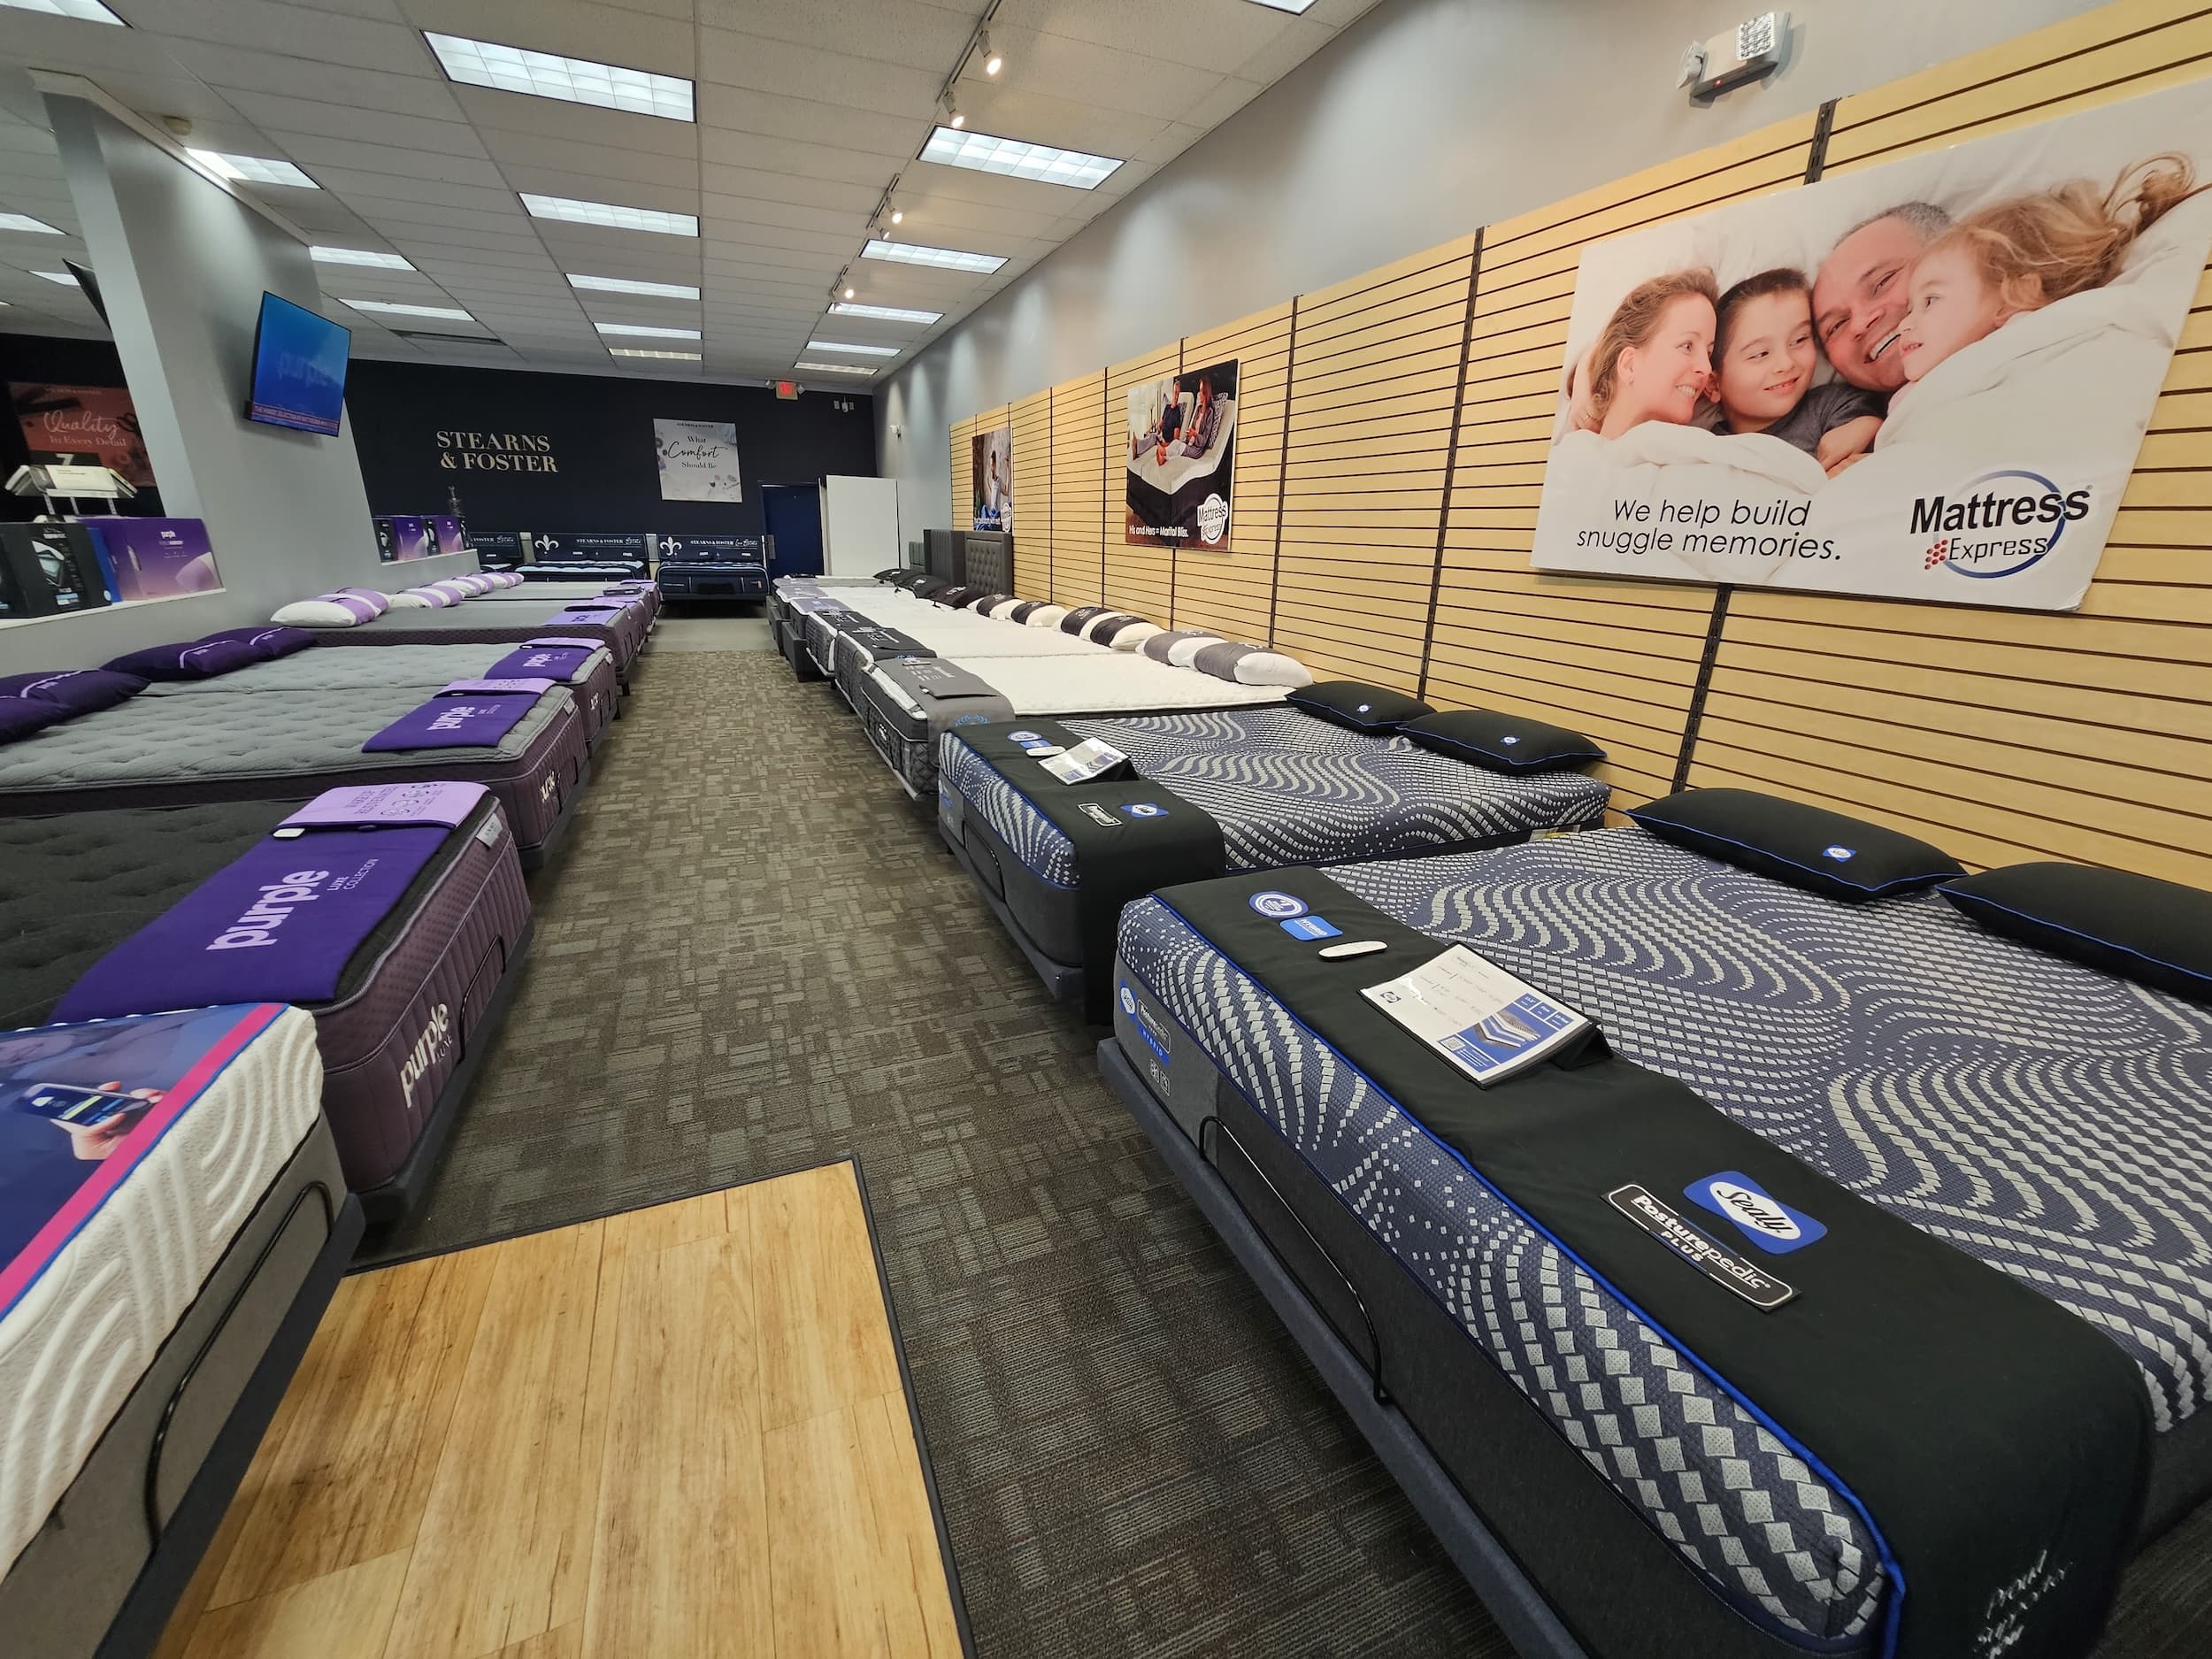 Mattress Express New Hartford New York Showroom Featuring Purple Mattresses is the best place to buy a mattress